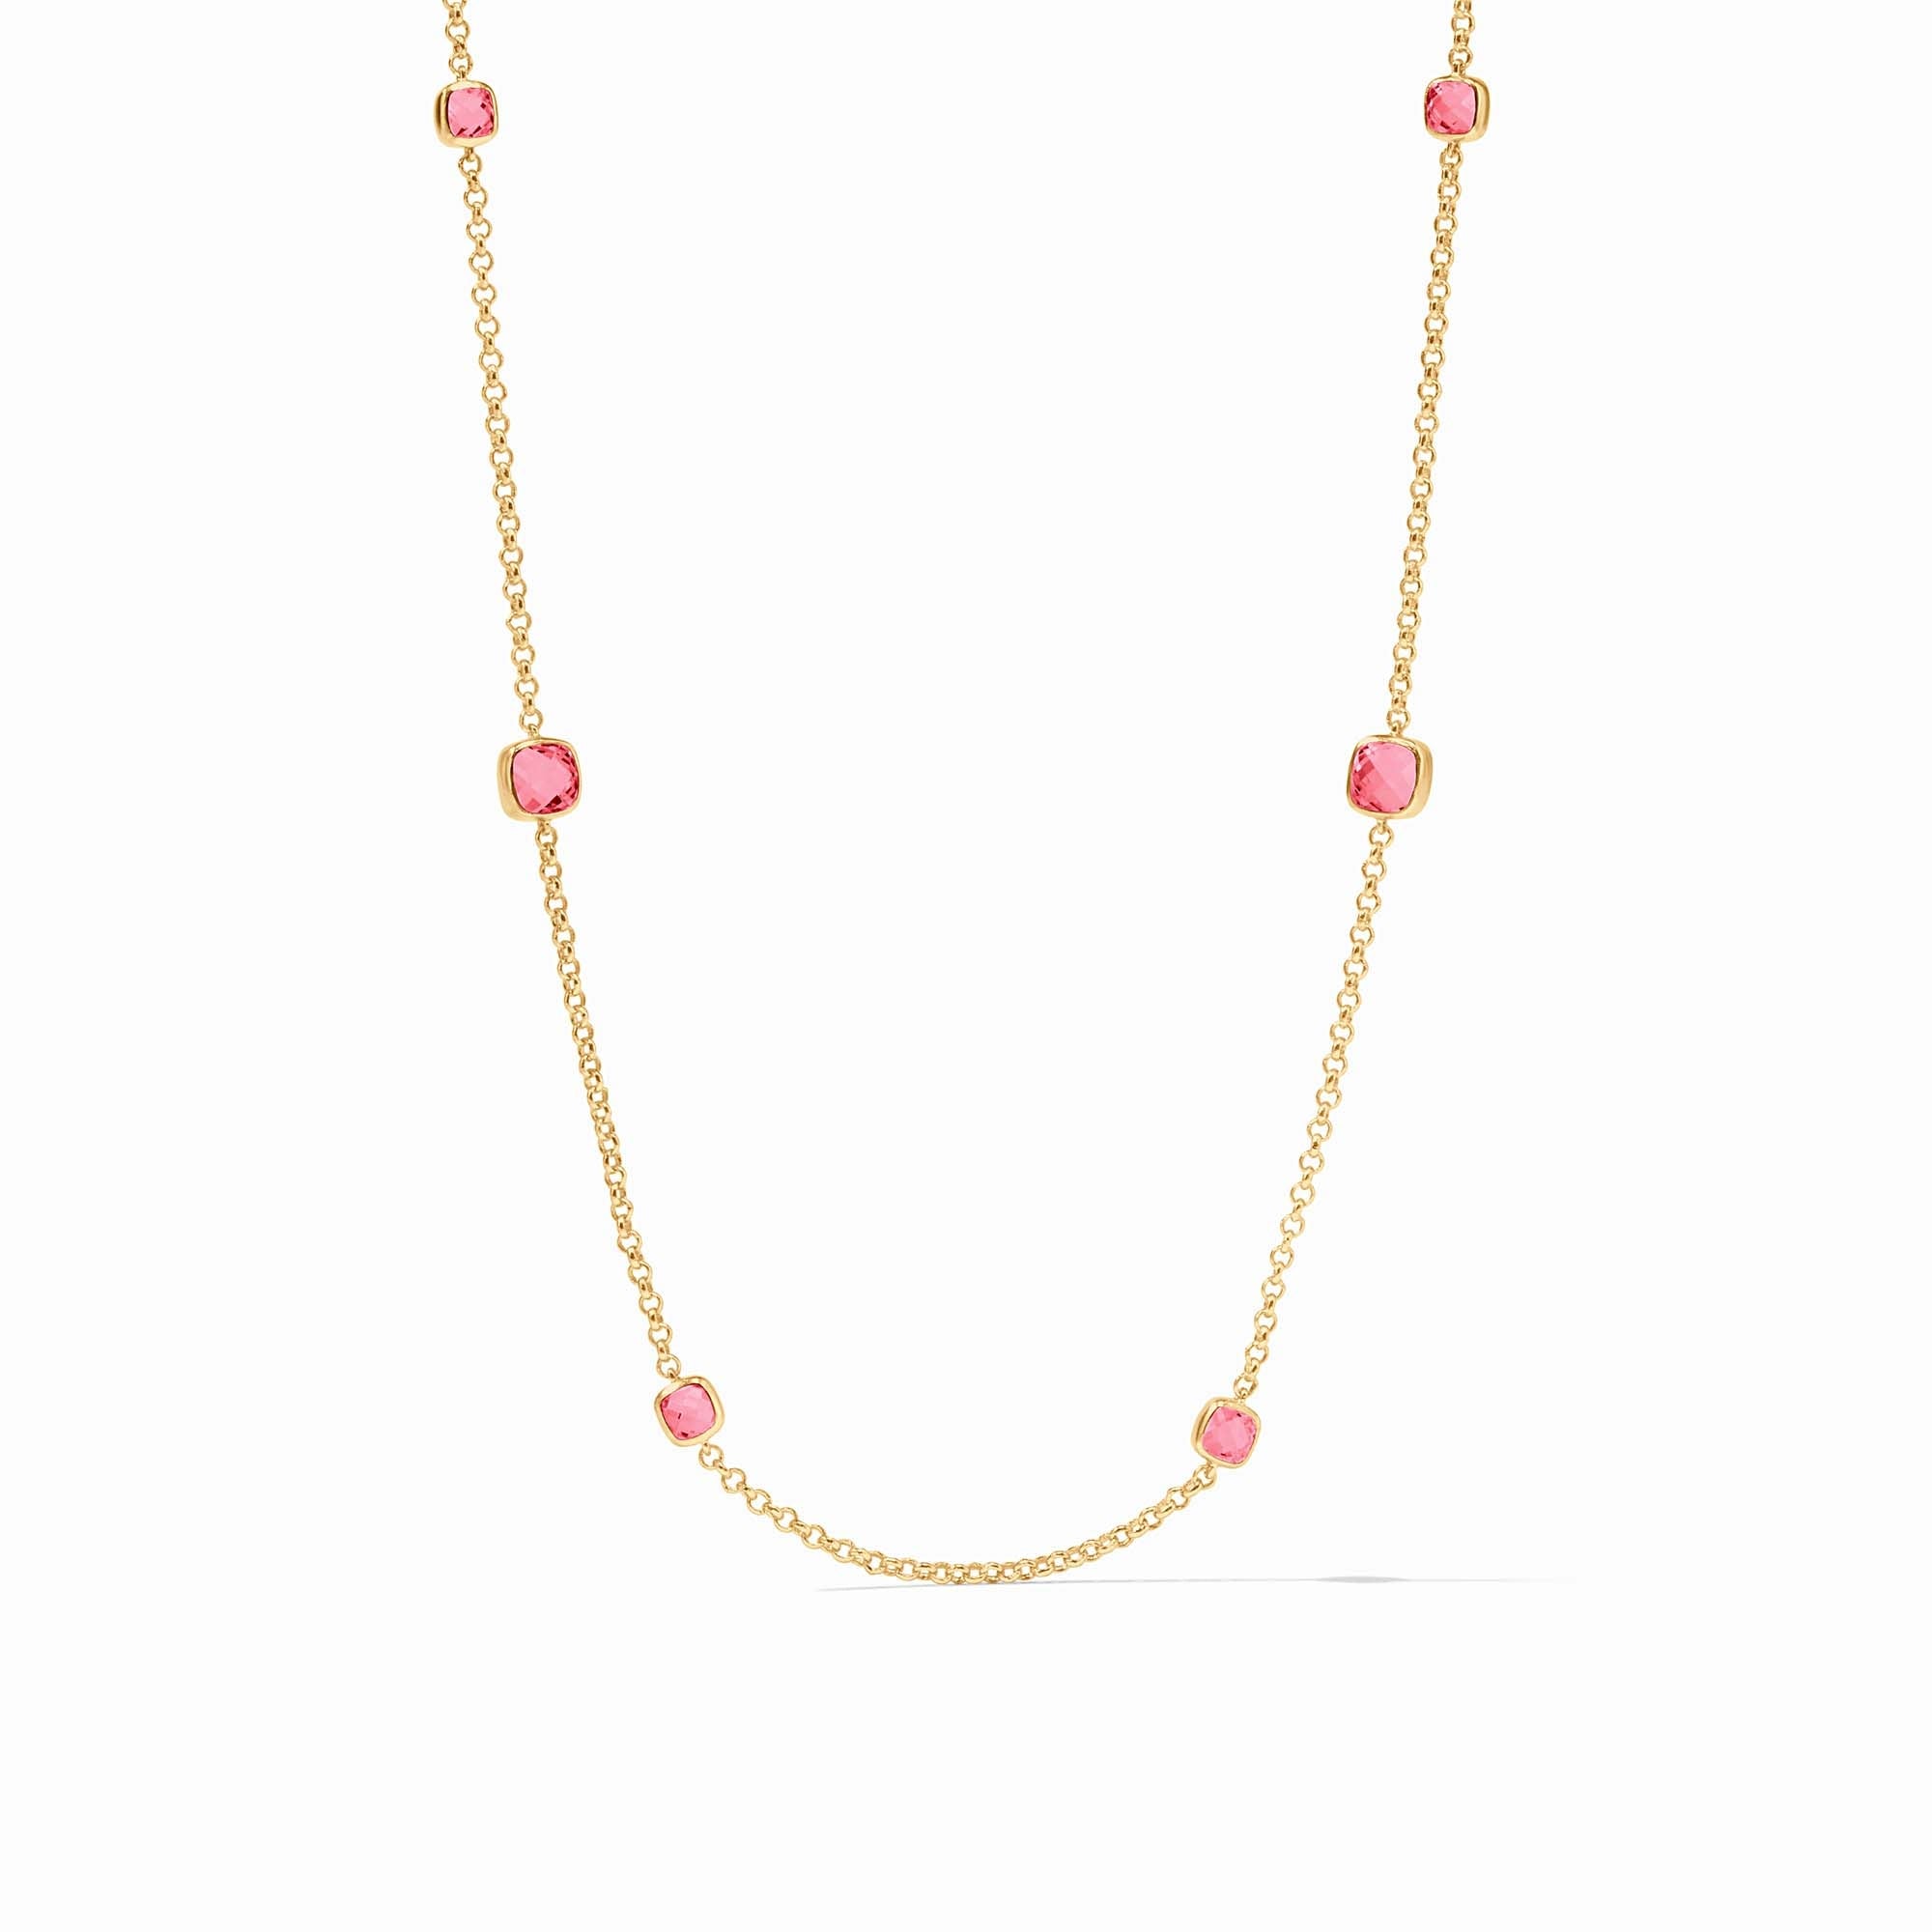 Julie Vos - Aquitaine Station Necklace, Peony Pink